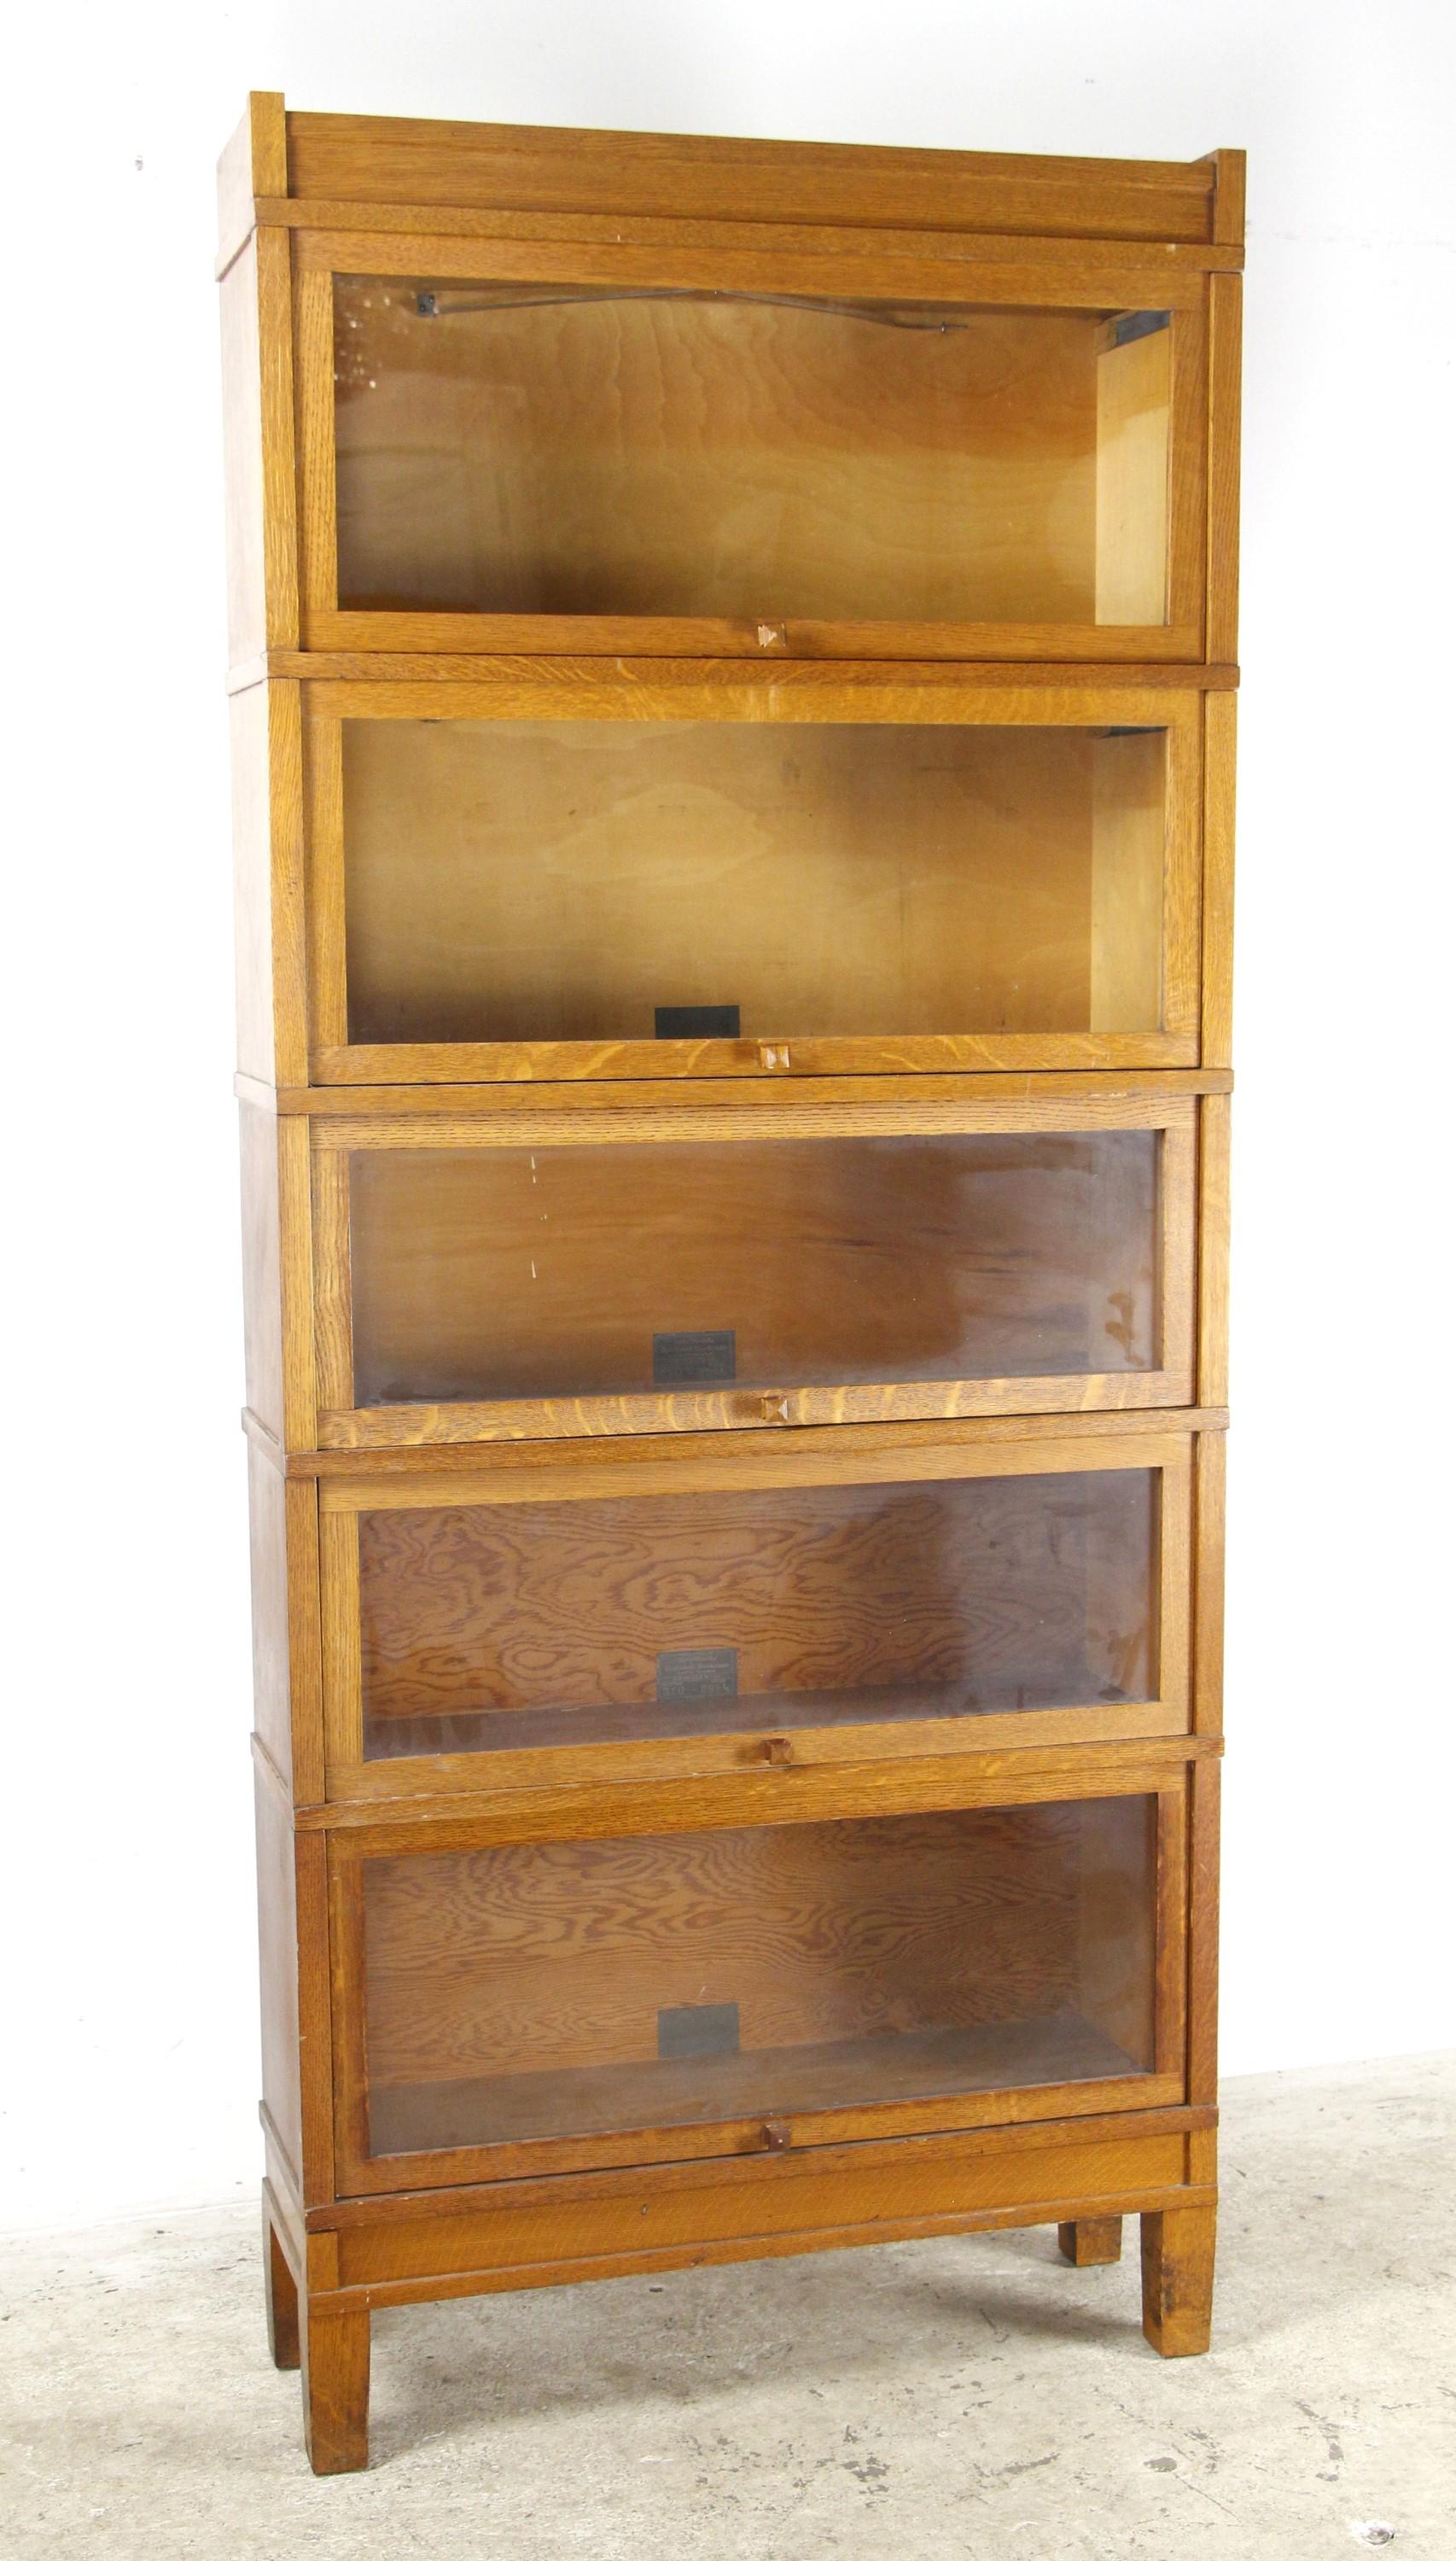 Medium tone oak bookcase with five sections and glass doors. Made 

Early 20th century five section bookcase made out of oak with a medium stain. Glass doors slide up and into each shelf unit for storage. Modular construction. Manufactured by